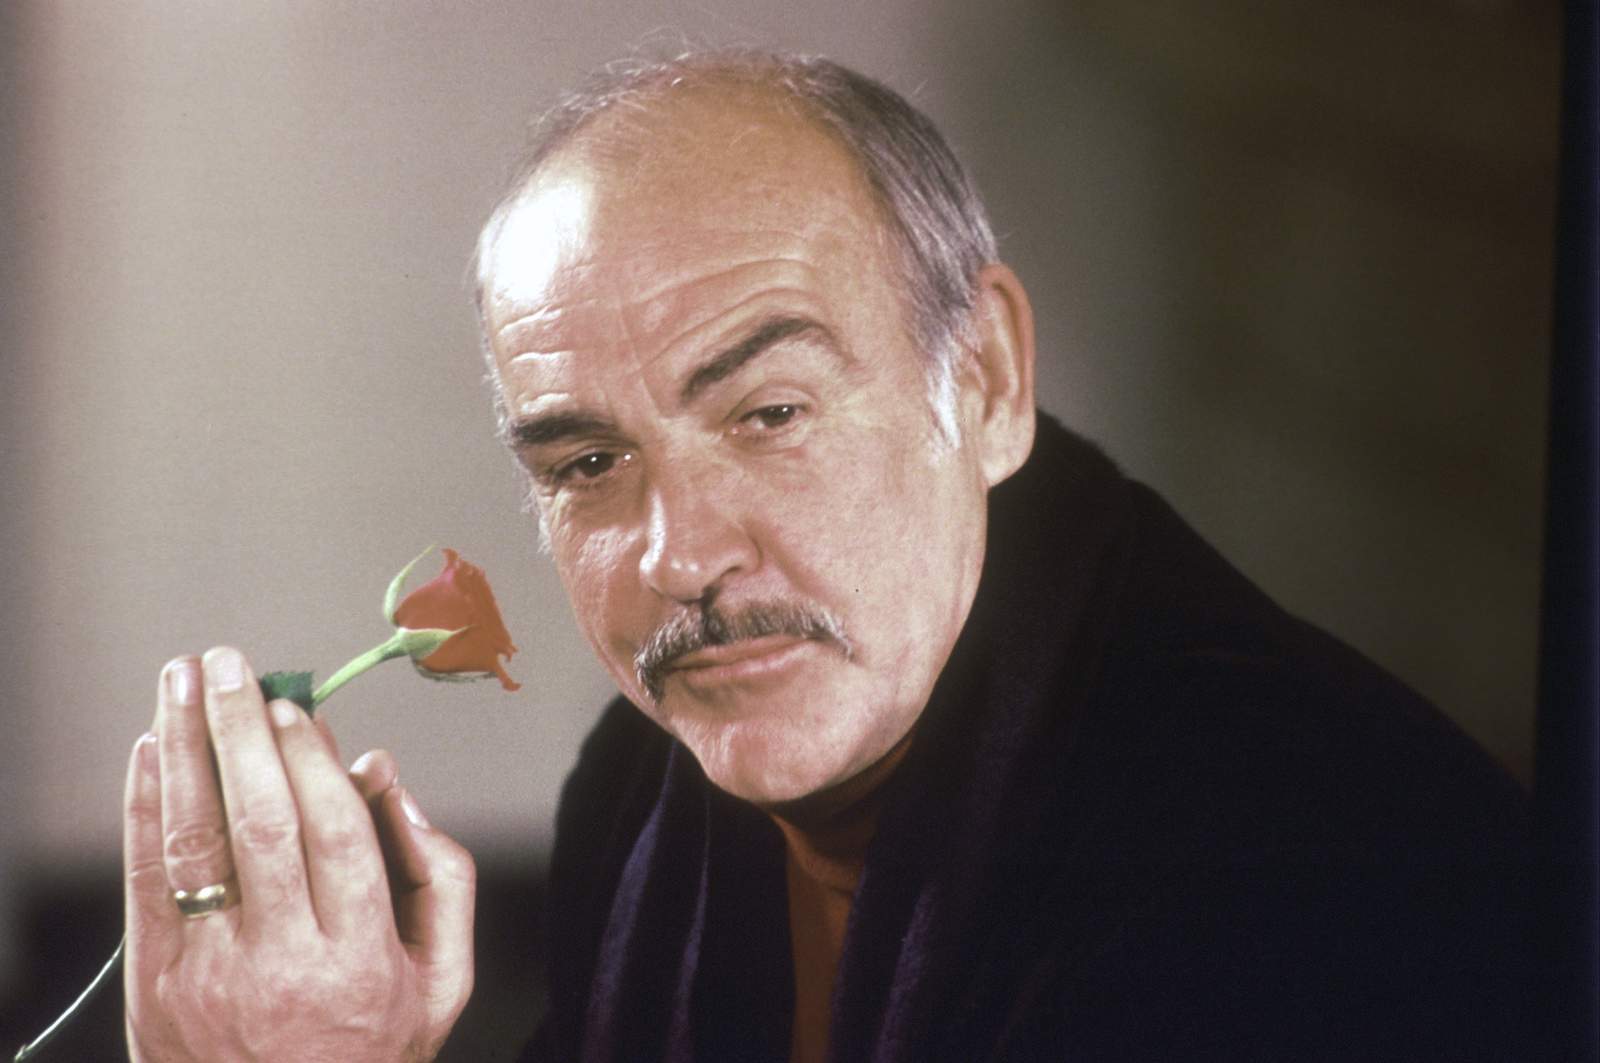 Scottish actor Sean Connery has died at the age of 90, BBC says